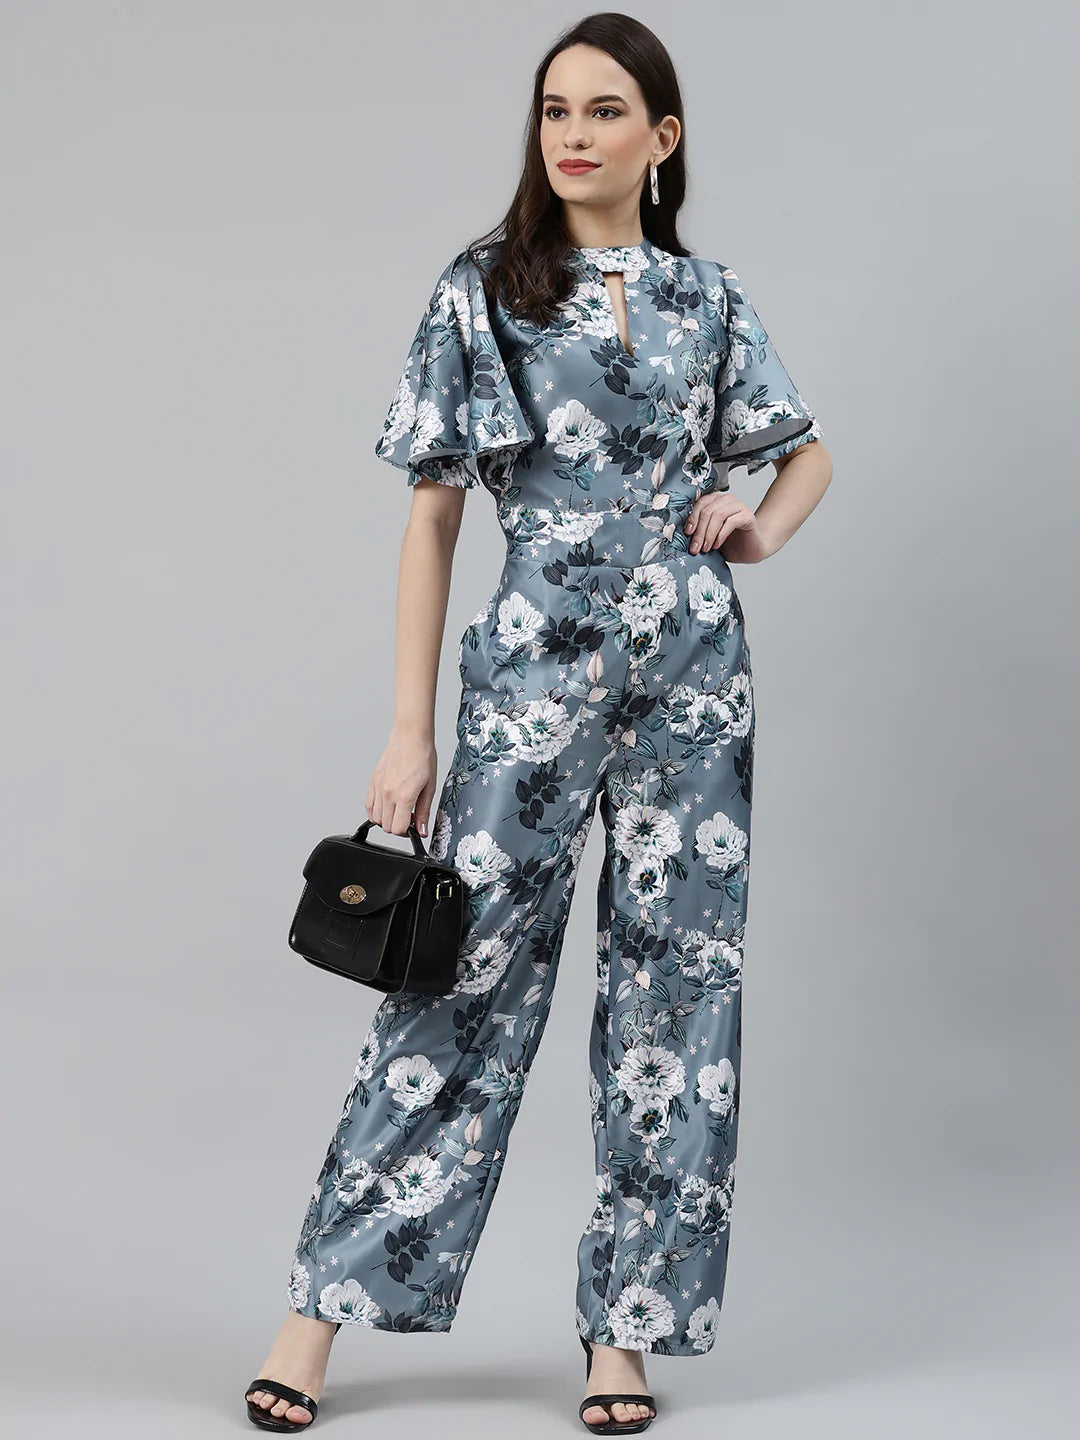 Jompers Women Grey & Off-White Printed Keyhole Neck Flared Sleeves Basic Jumpsuit ( JUP 8014 Grey )